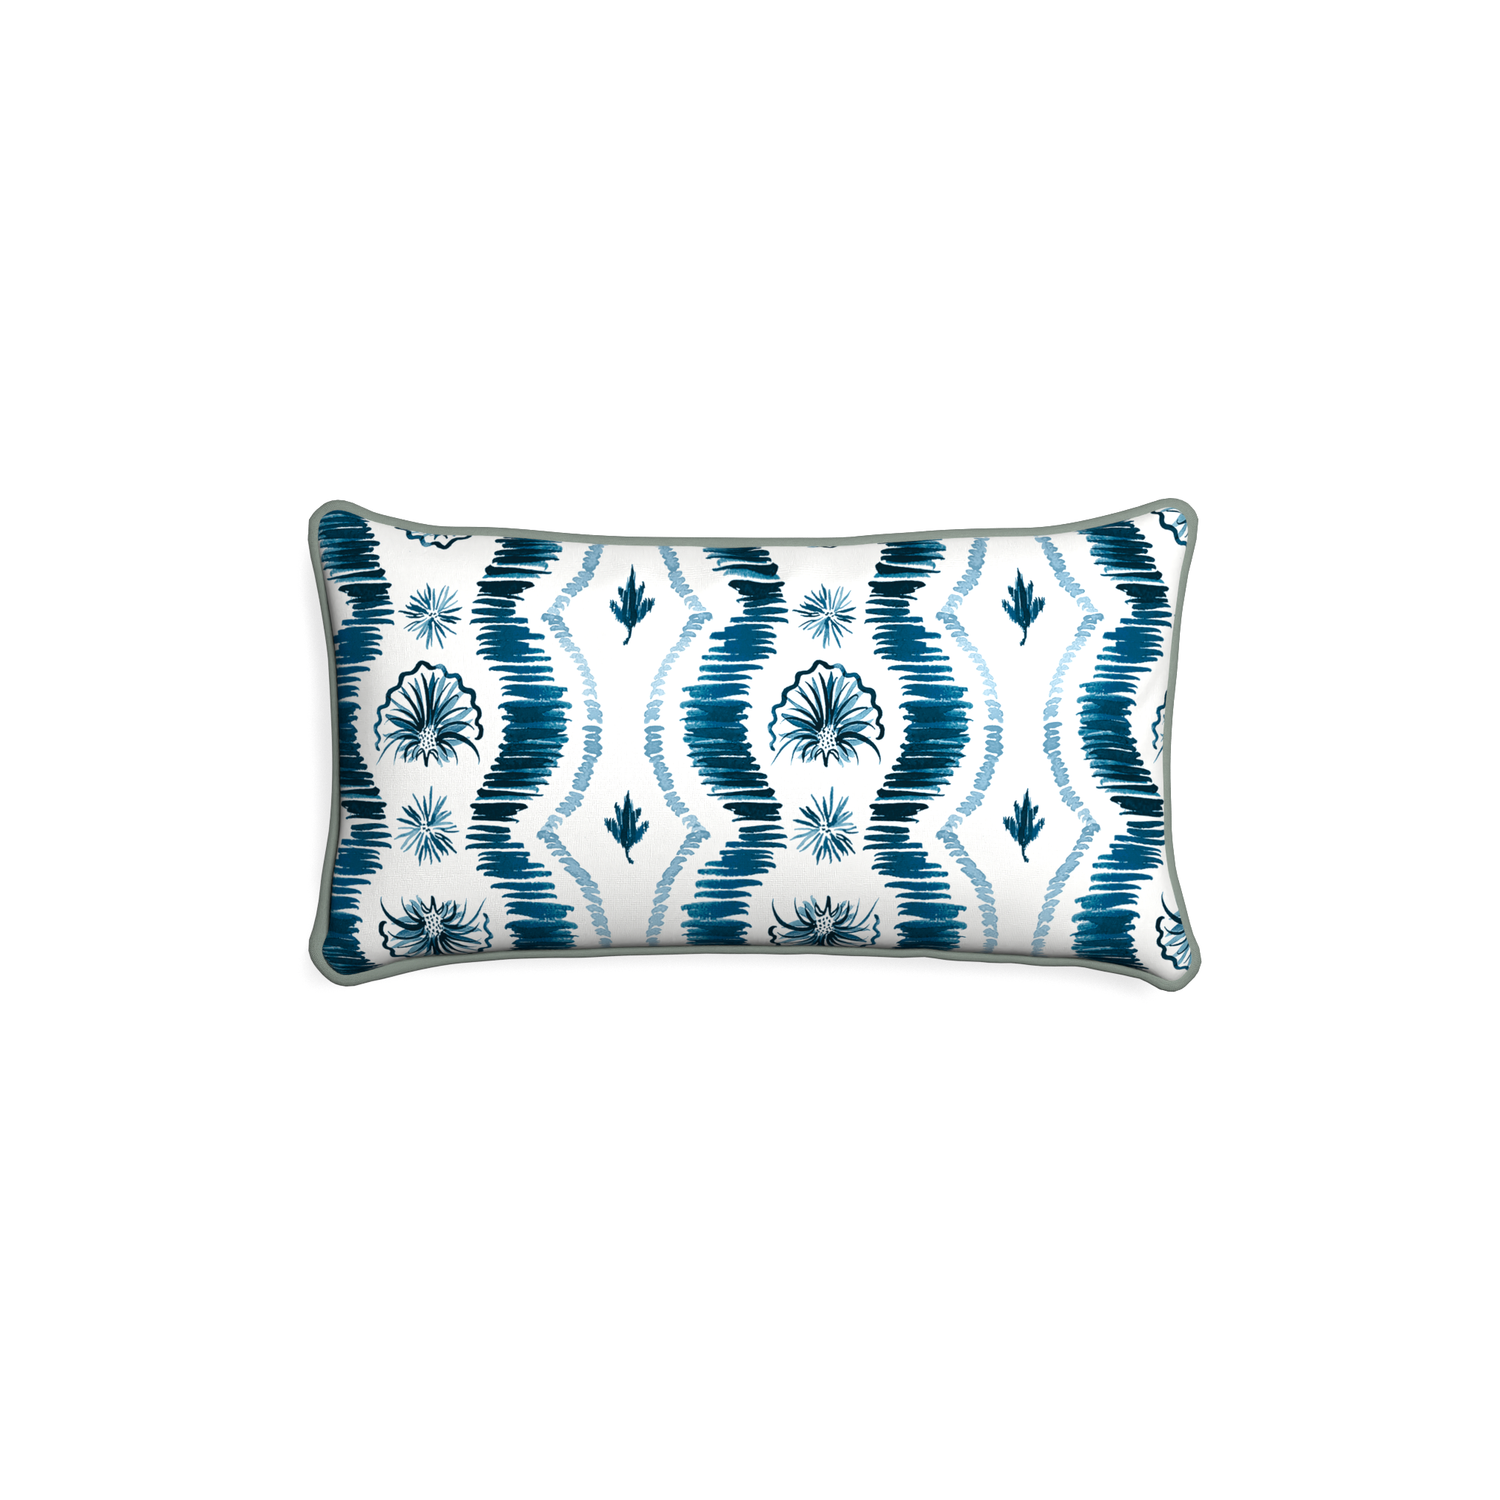 Petite-lumbar alice custom blue ikatpillow with sage piping on white background